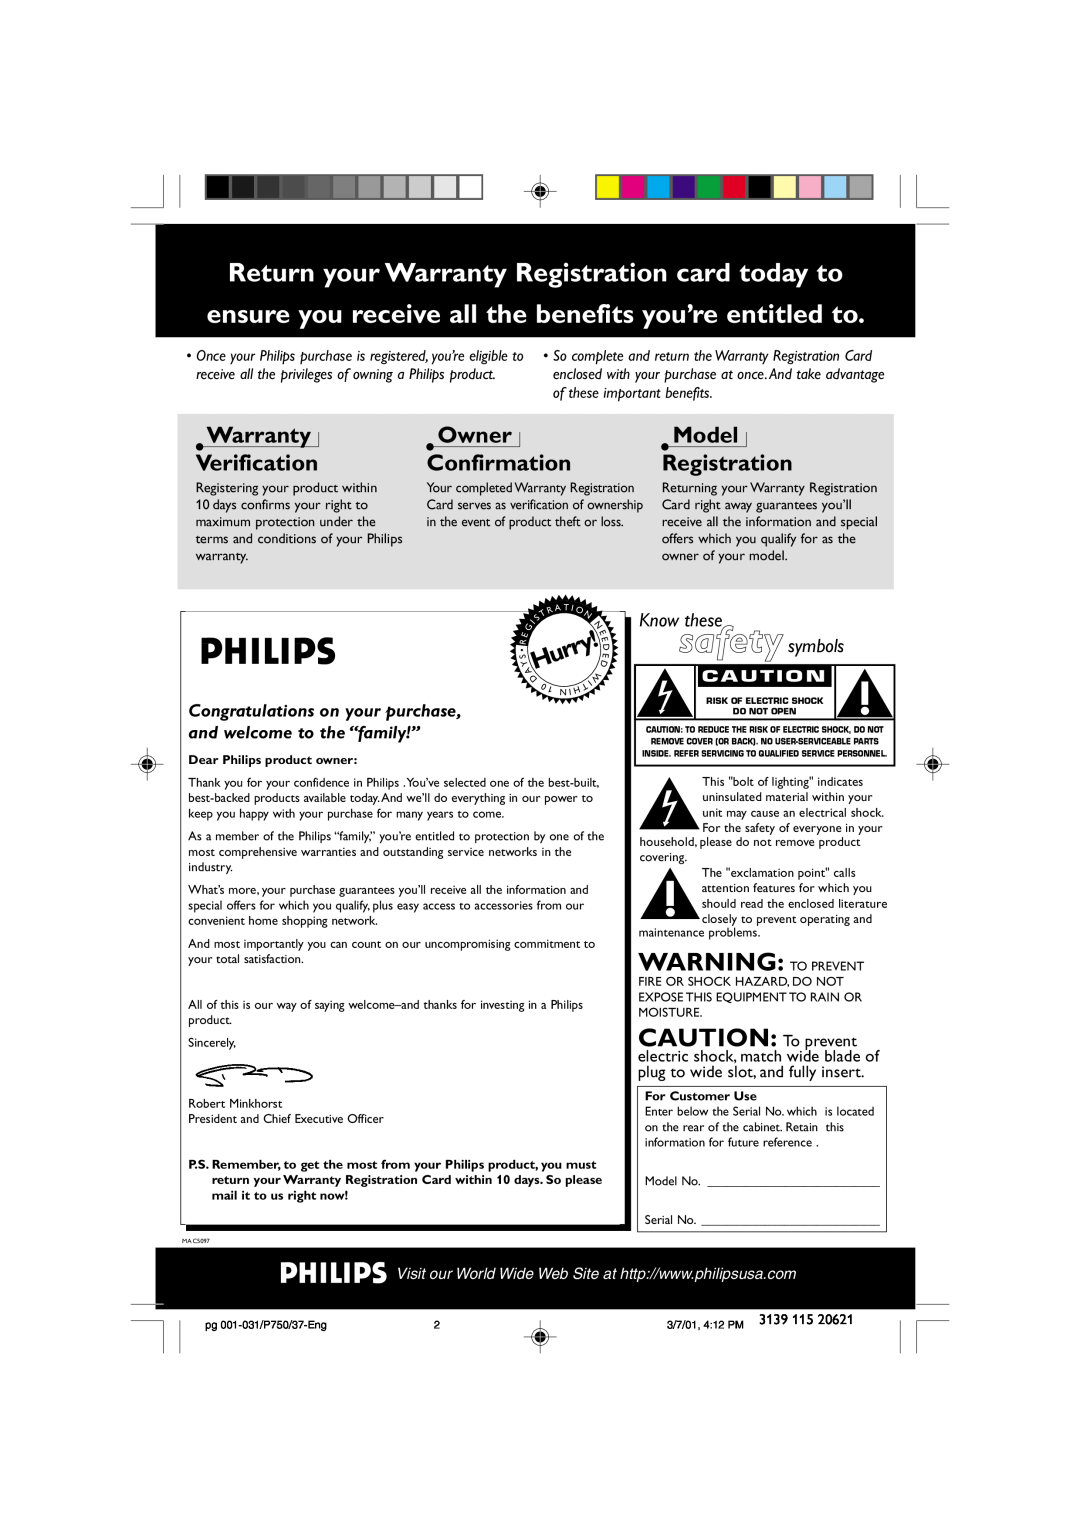 Philips FWP750 manual Return your Warranty Registration card today to, Warranty Verification, Owner Confirmation, AHurry 